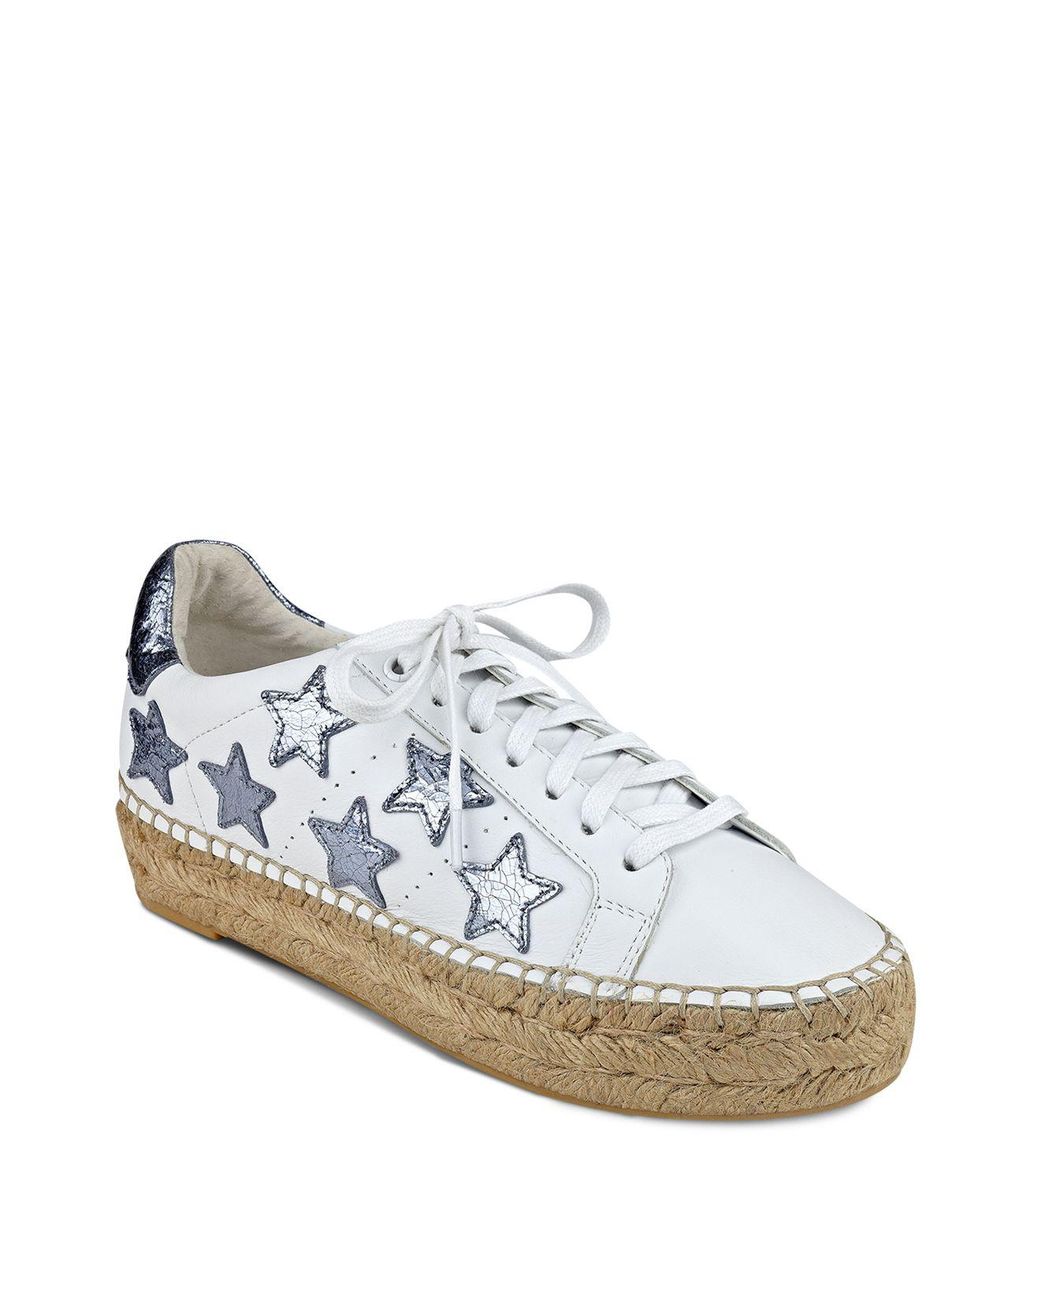 Marc Fisher Marcia Star Espadrille Lace Up Sneakers in White | Lyst